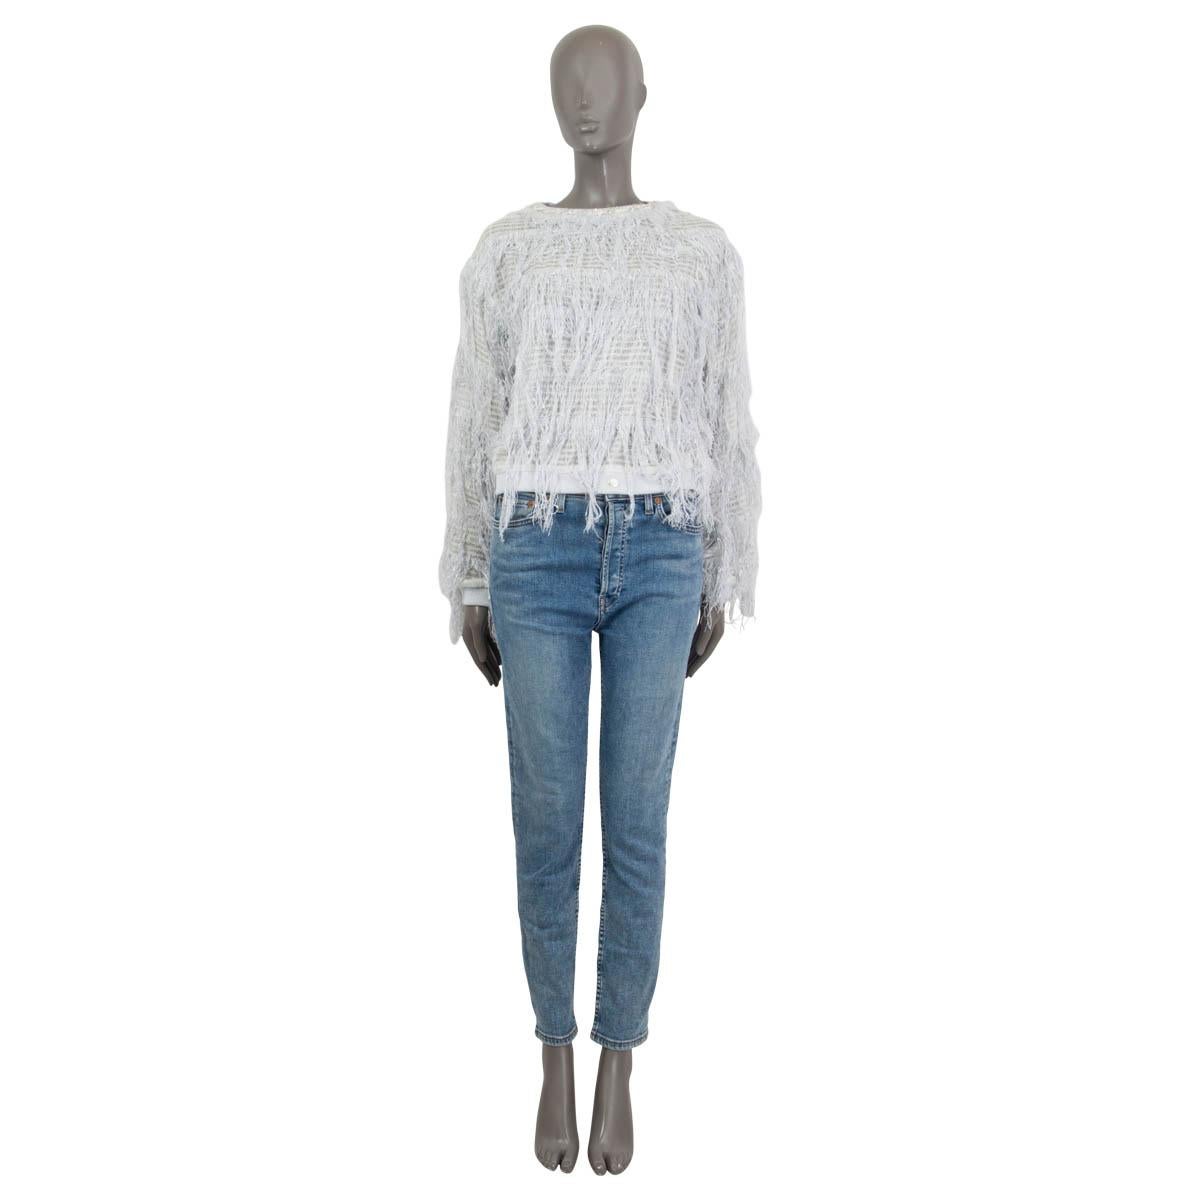 100% authentic Chanel 2018 fringed knit sweater in light gray cotton (27%), polyester (25%), polyamide (18%), viscose (18%), acrylic (10%) and metal polyester (2%). Features a lurex trim at the neck and long sleeves. Has a faux pearl 'CC' sign at